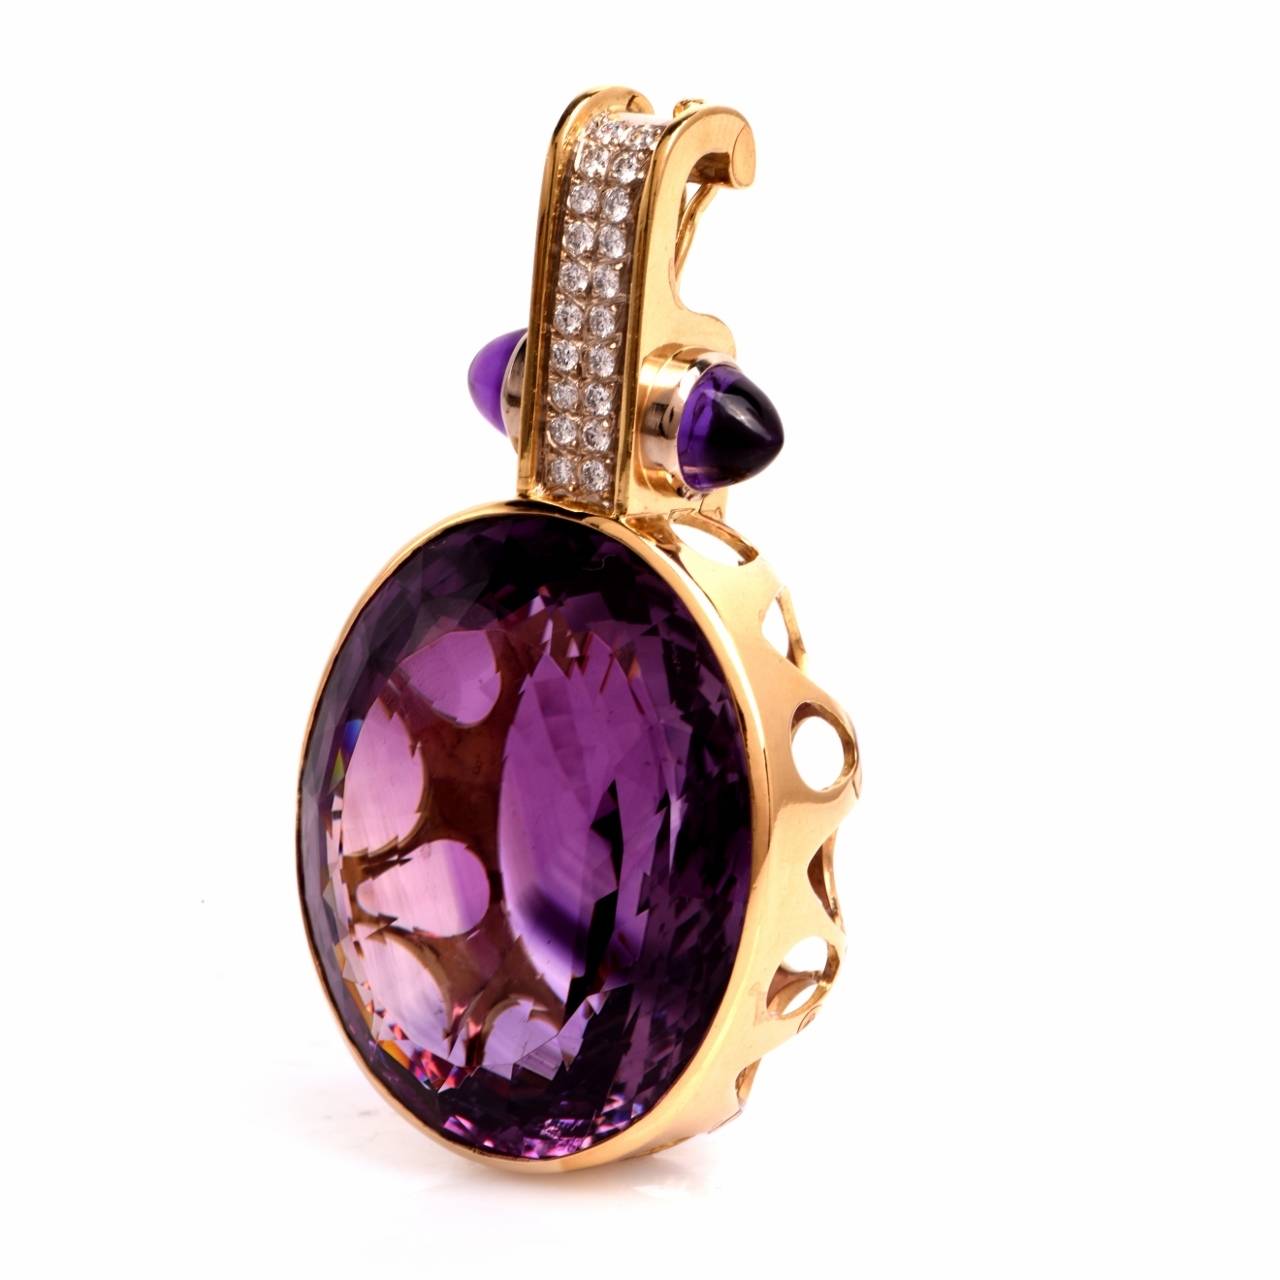 This opulent and attention-seeking Retro  pendant necklace is crafted in solid 18K yellow gold and weighs 47.5 grams. This eye-catching large pendant exposes an outstanding  103.55 ct oval-faceted amethyst, positioned within an ornate, openwork